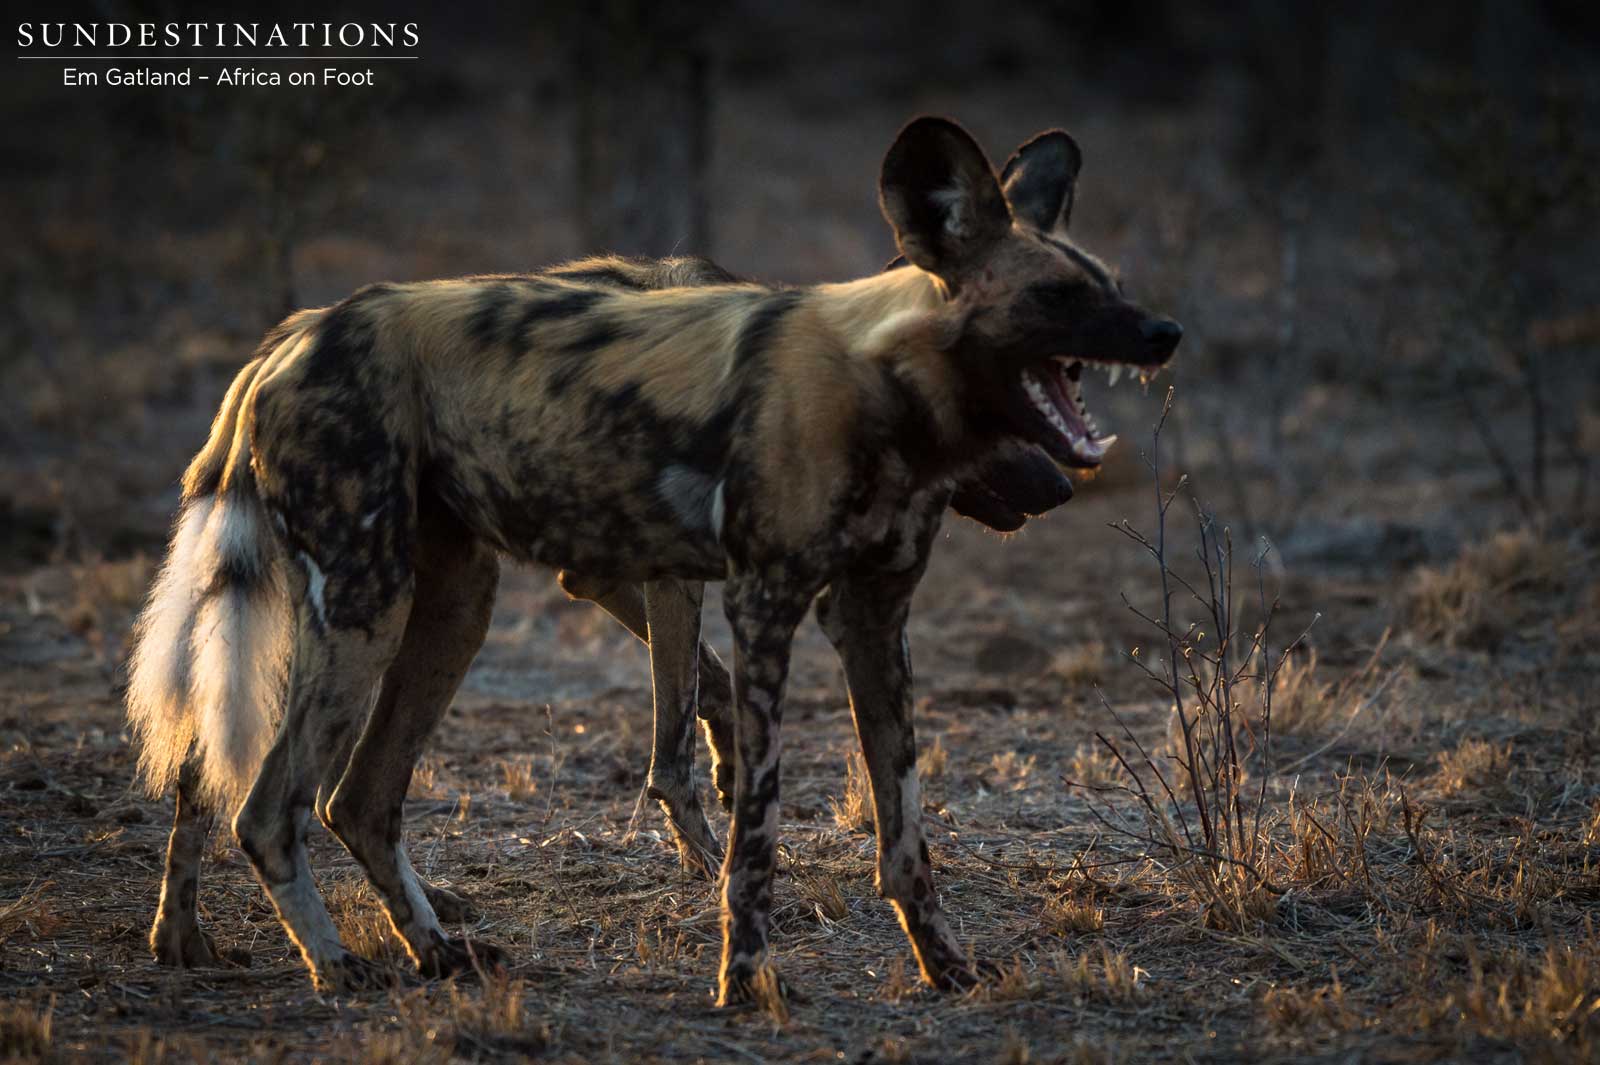 The Hunting Elite: African Wild Dogs 4 Kills in 1 Morning